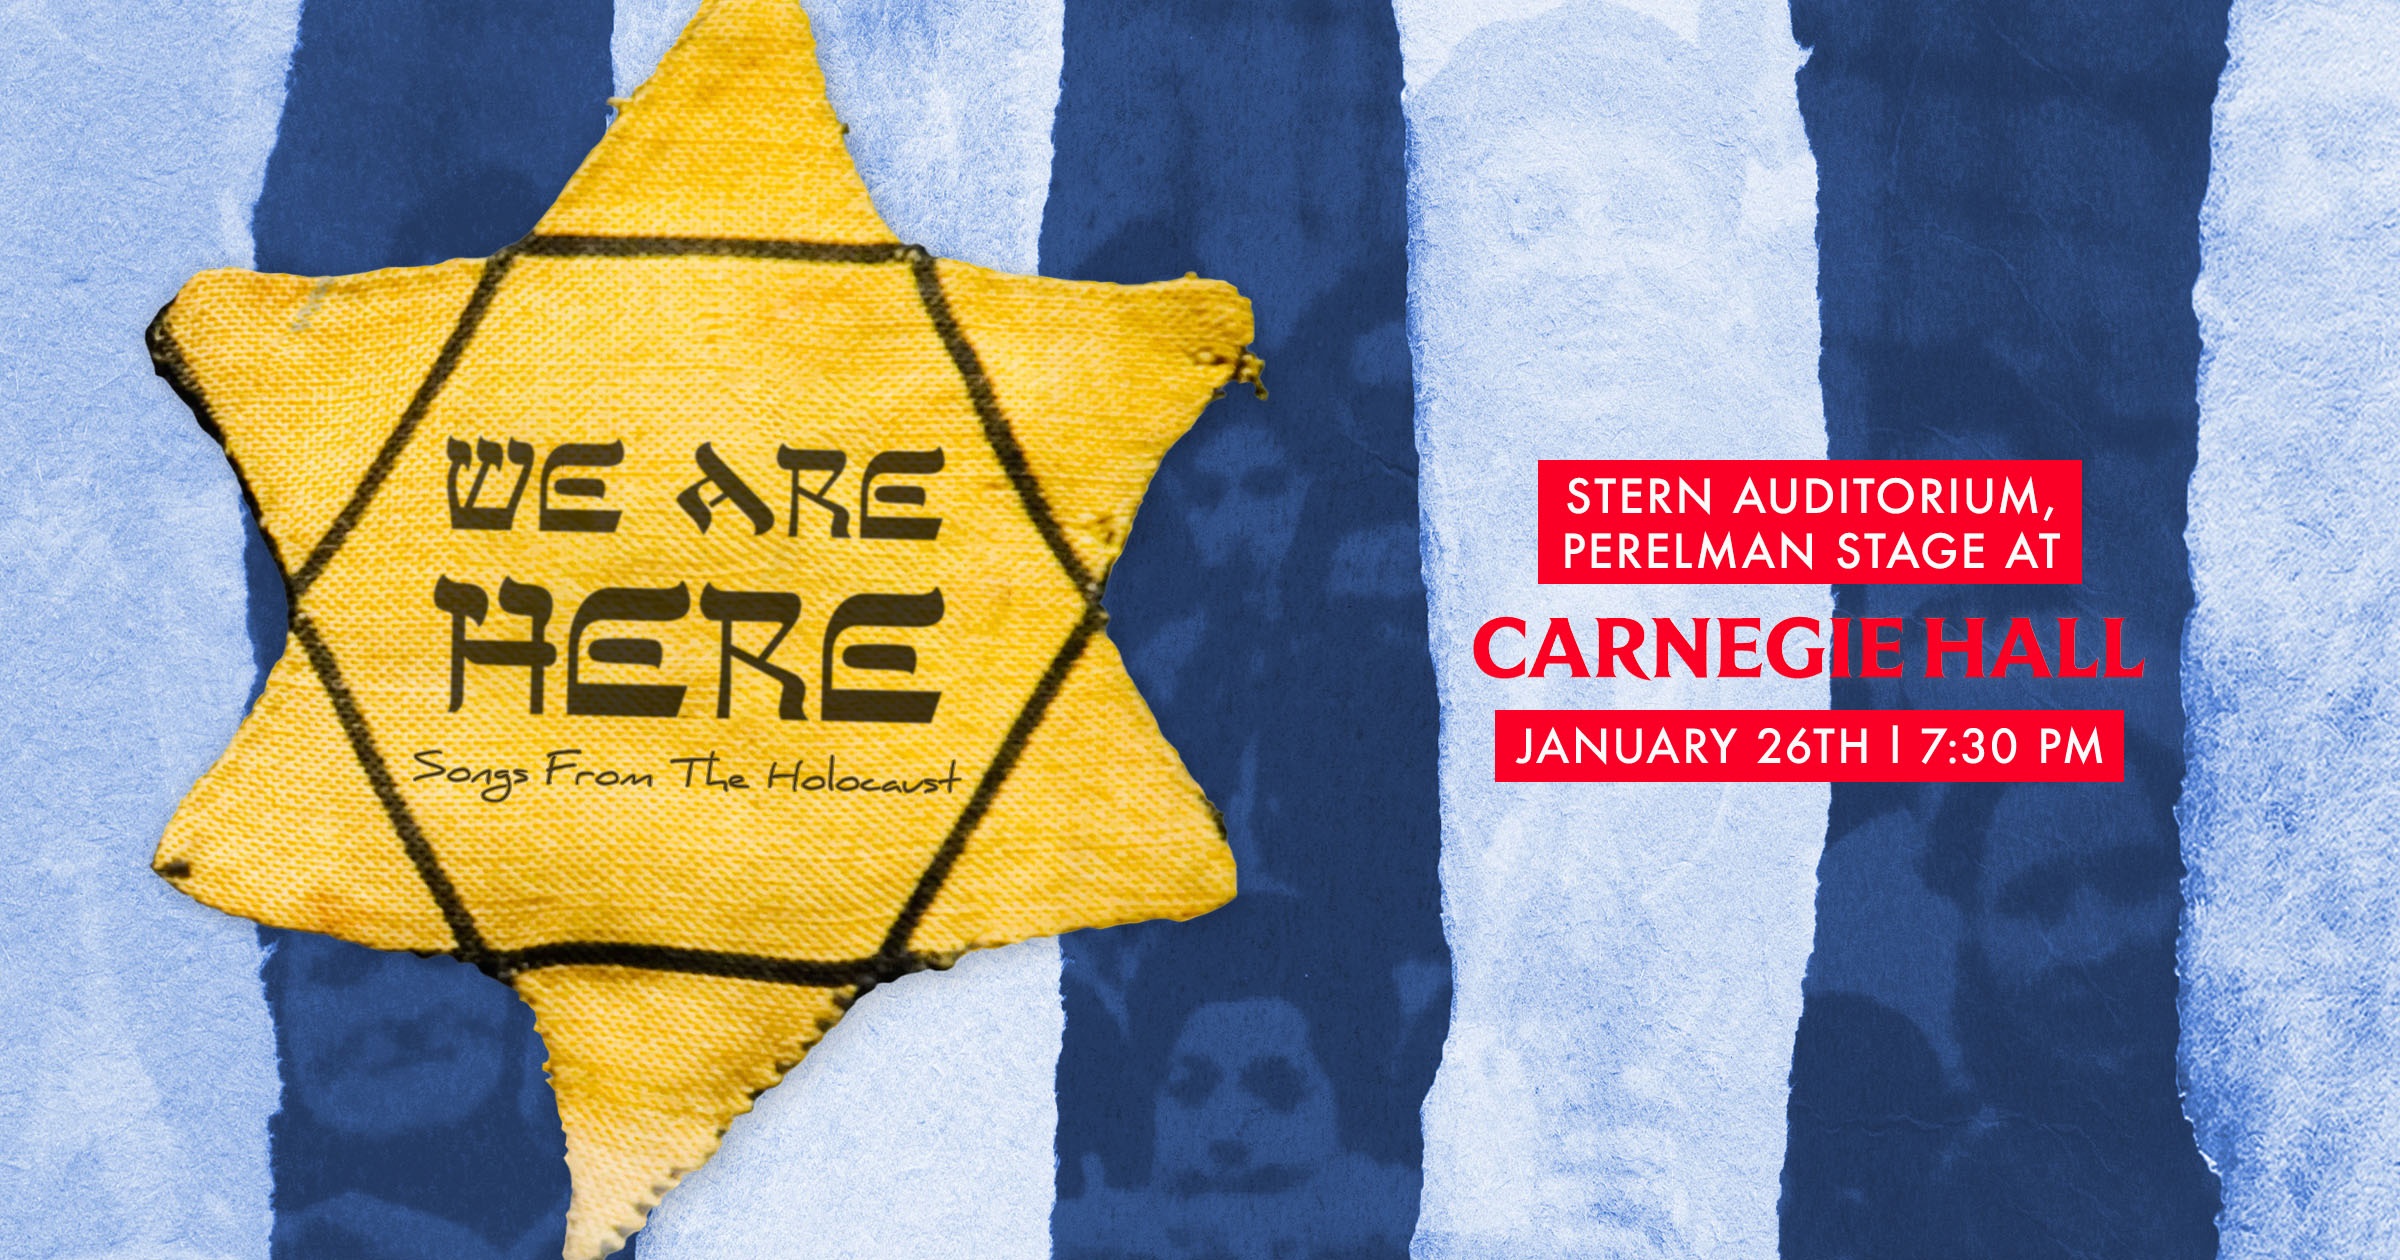 “We Are Here: Songs From The Holocaust” at Carnegie Hall